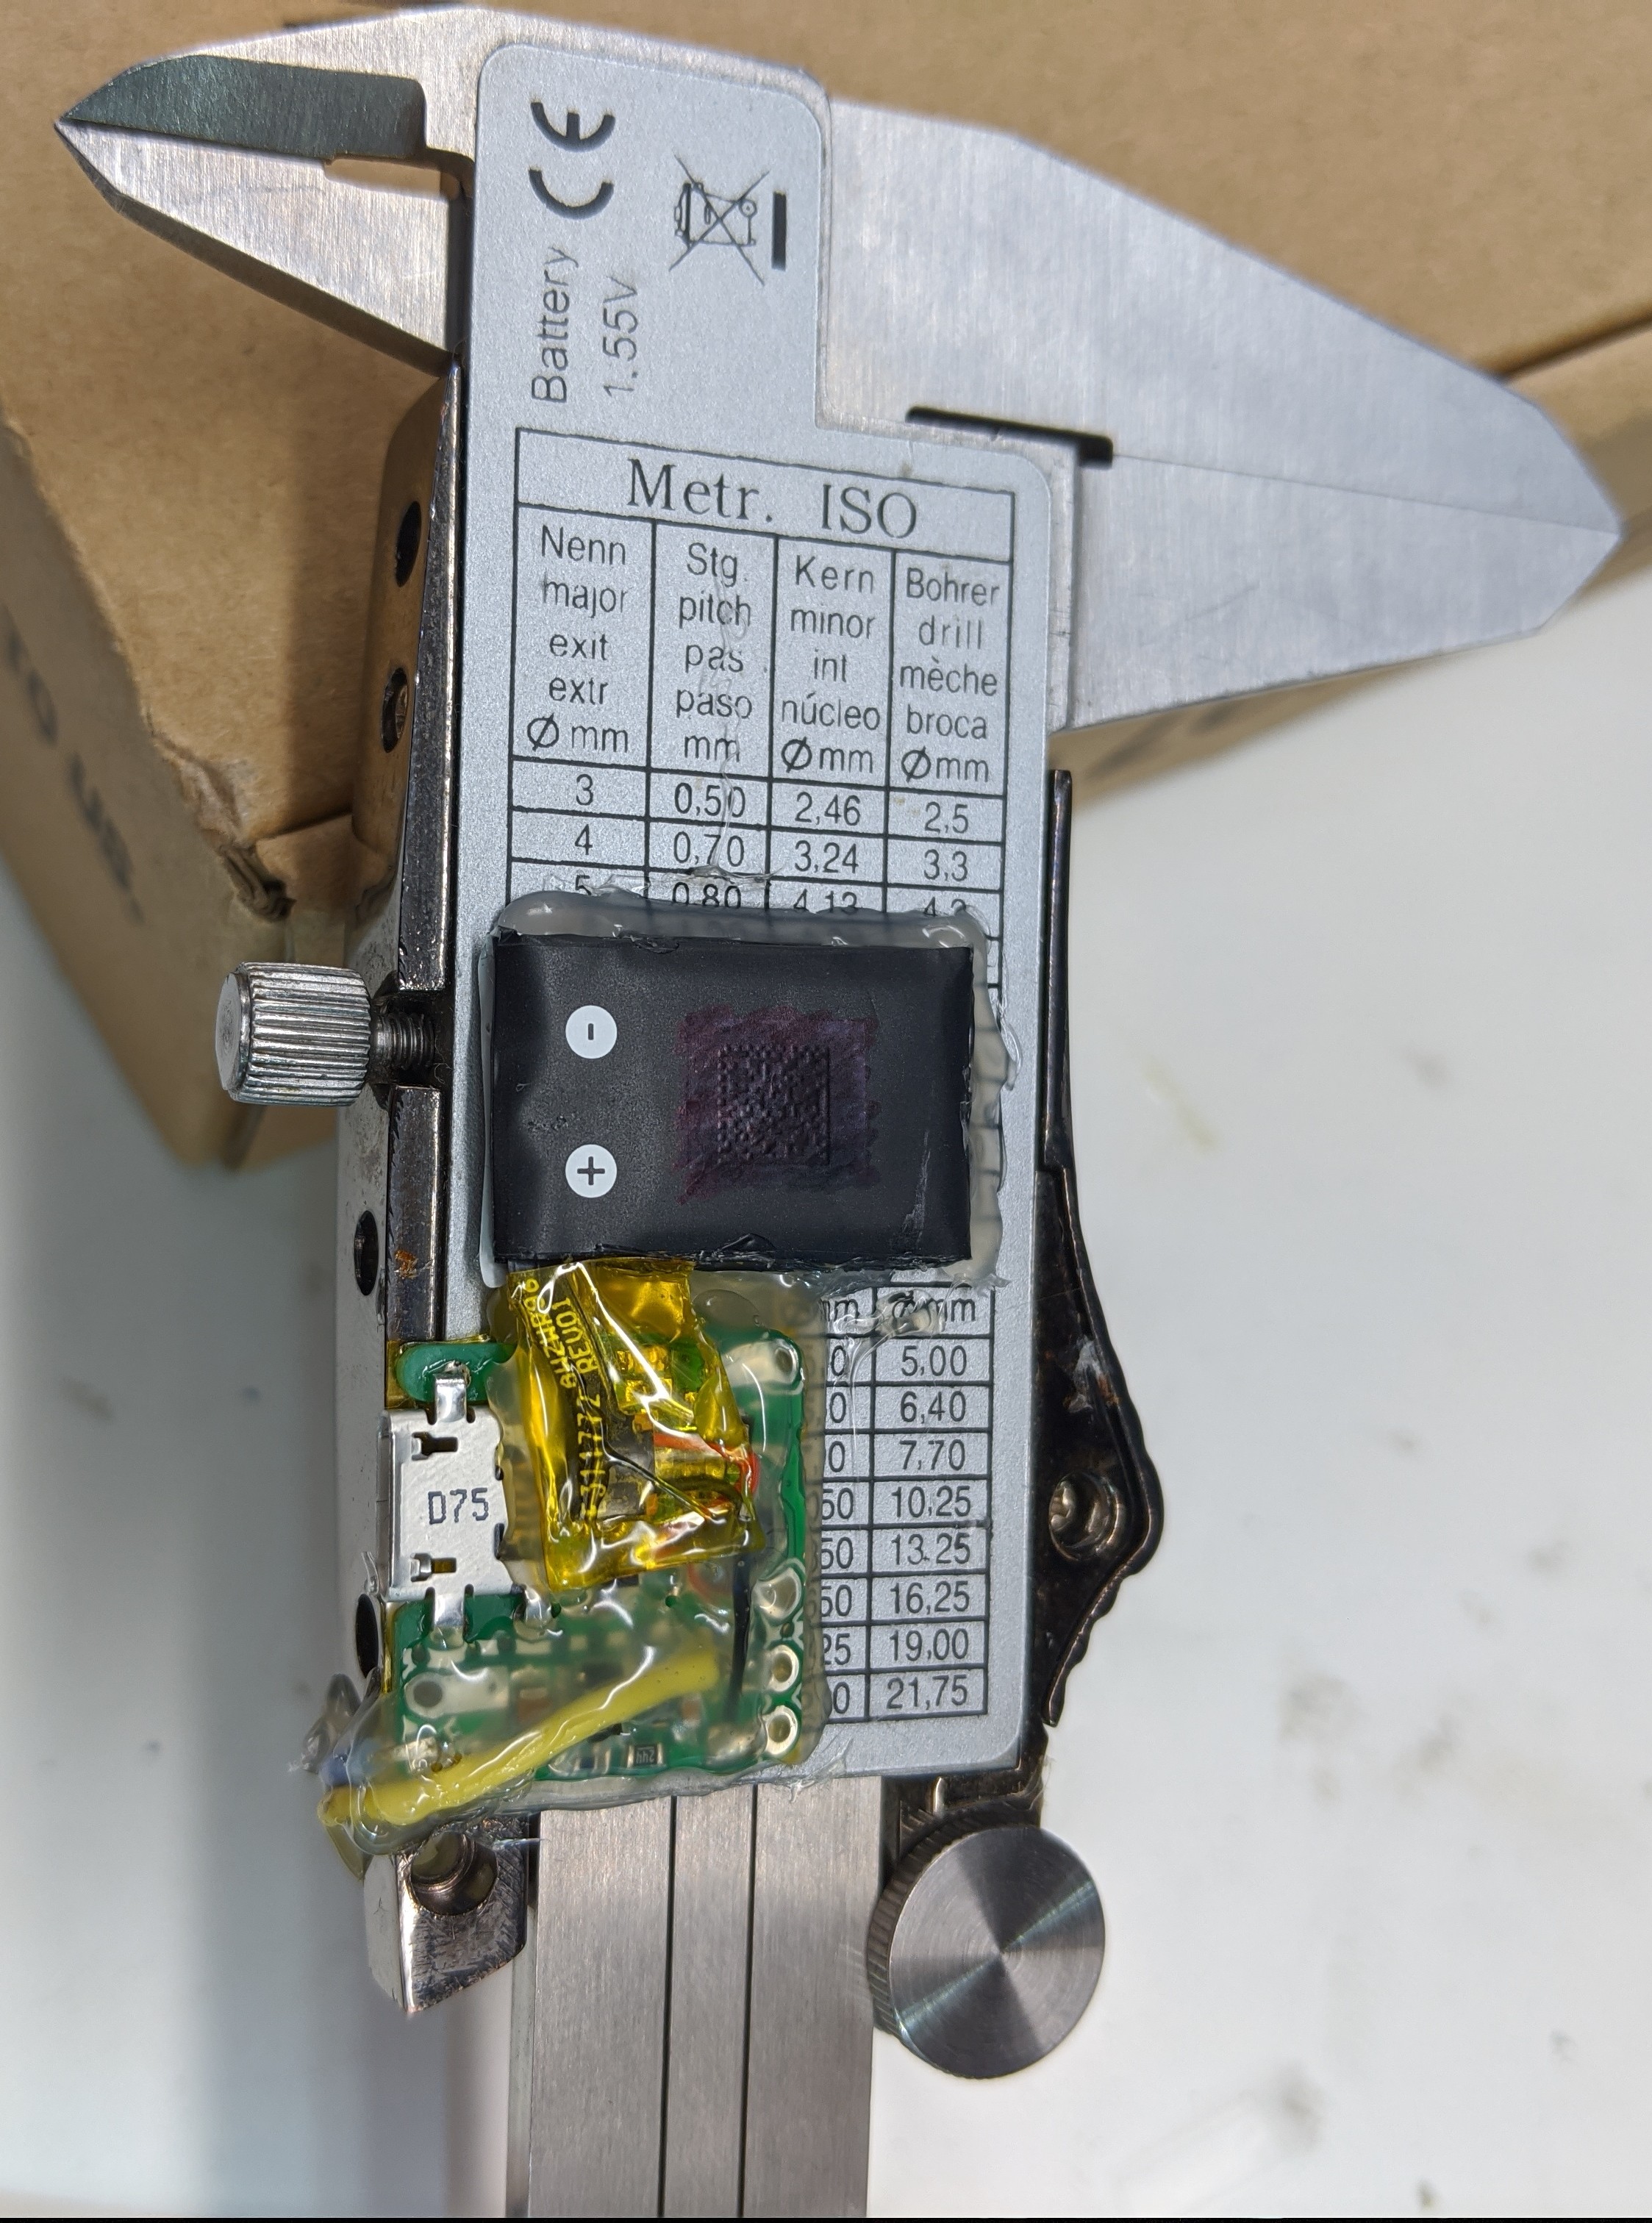 LPLDO (1.5V version) in use with a 90mAH battery on a digital caliper.